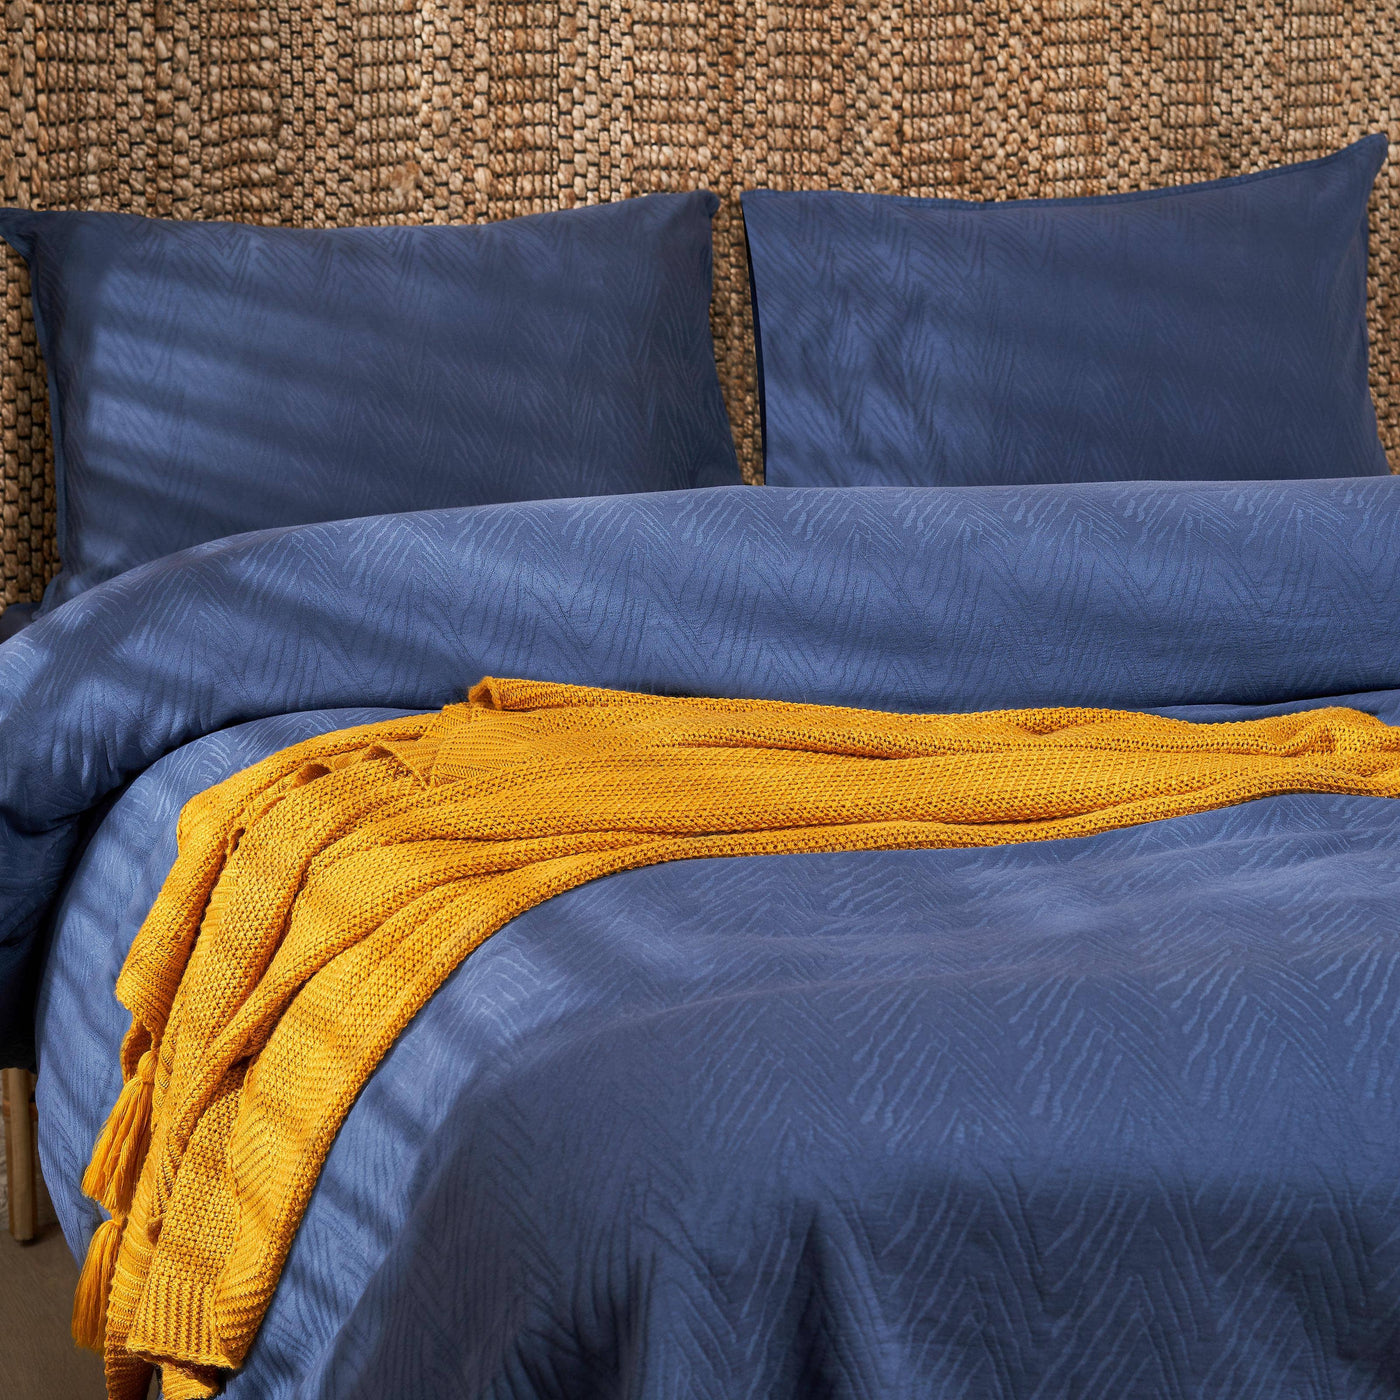 Freddie 100% Turkish Cotton 300 TC Fitted Sheet, Navy, Double Size Bed Sheets sazy.com